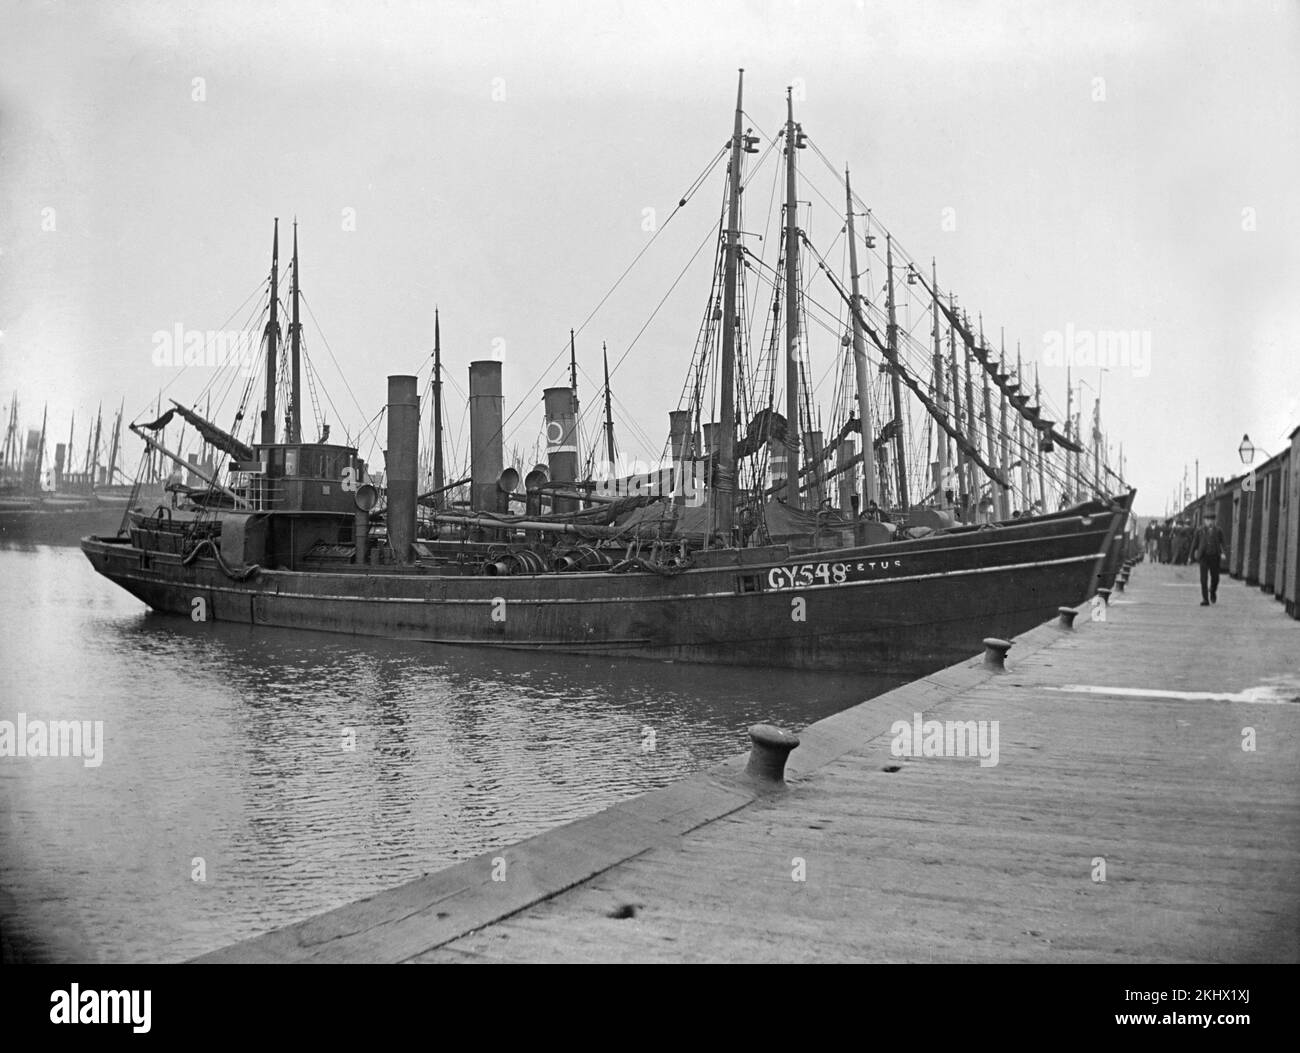 A late Victorian black and white photograph showing a steam trawler, number GY548 and named Cetus, in dock in an English town. Stock Photo